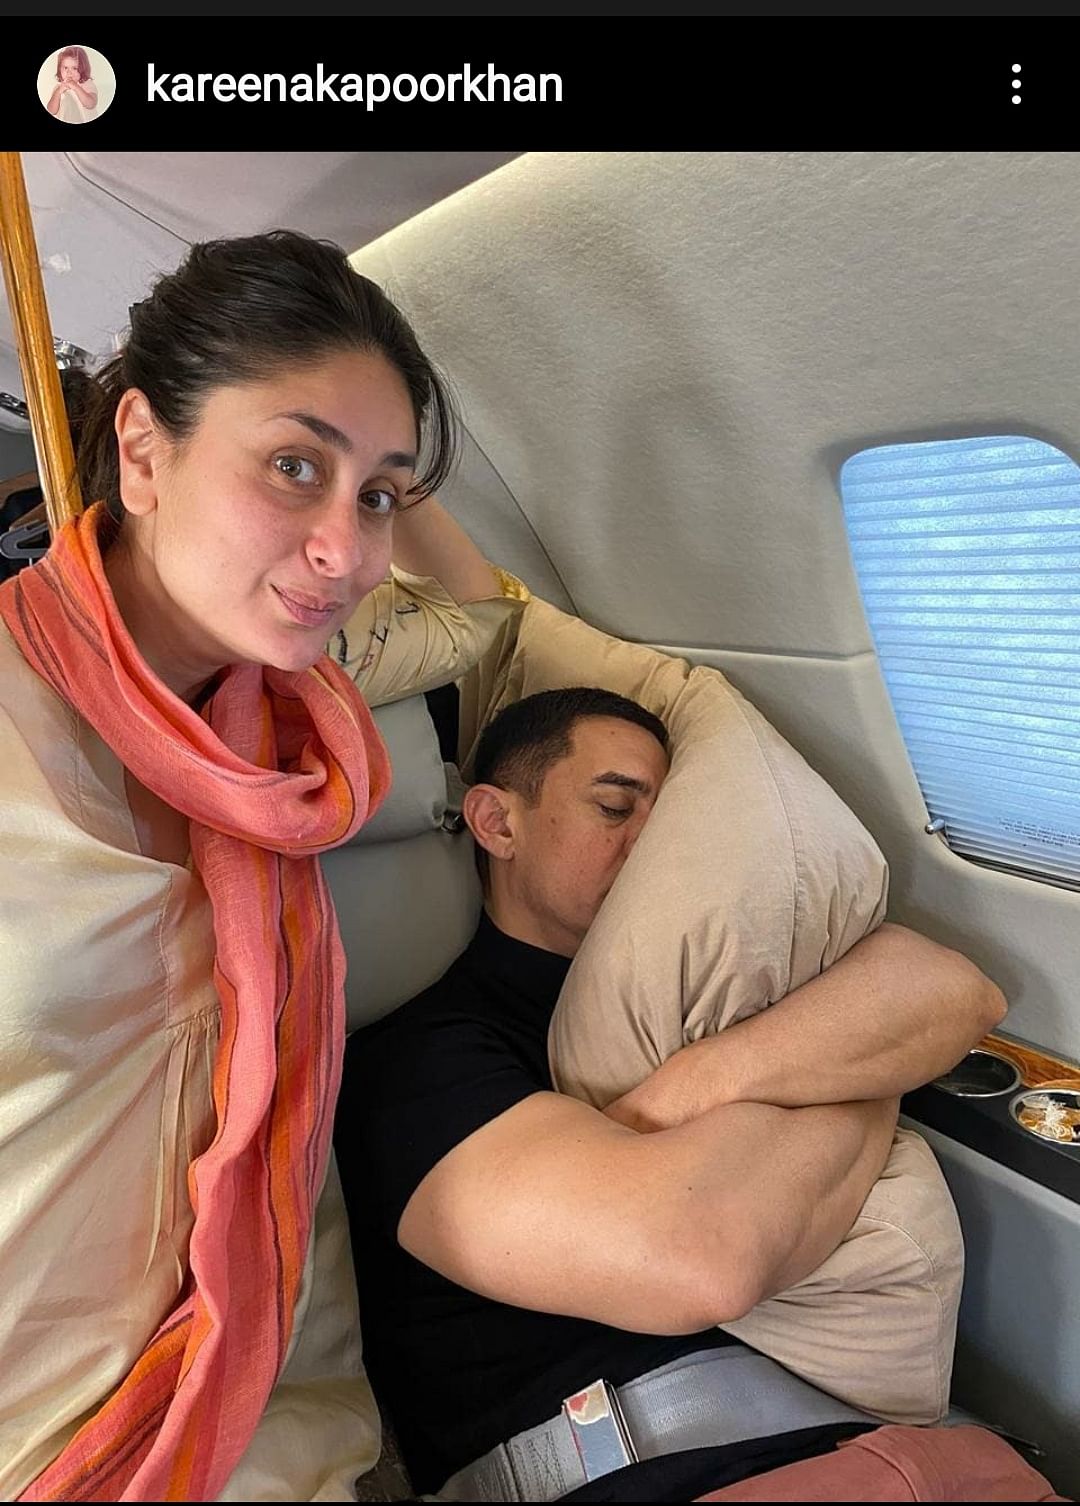 Here’s why birthday girl Kareena Kapoor Khan’s Insta game is on point.